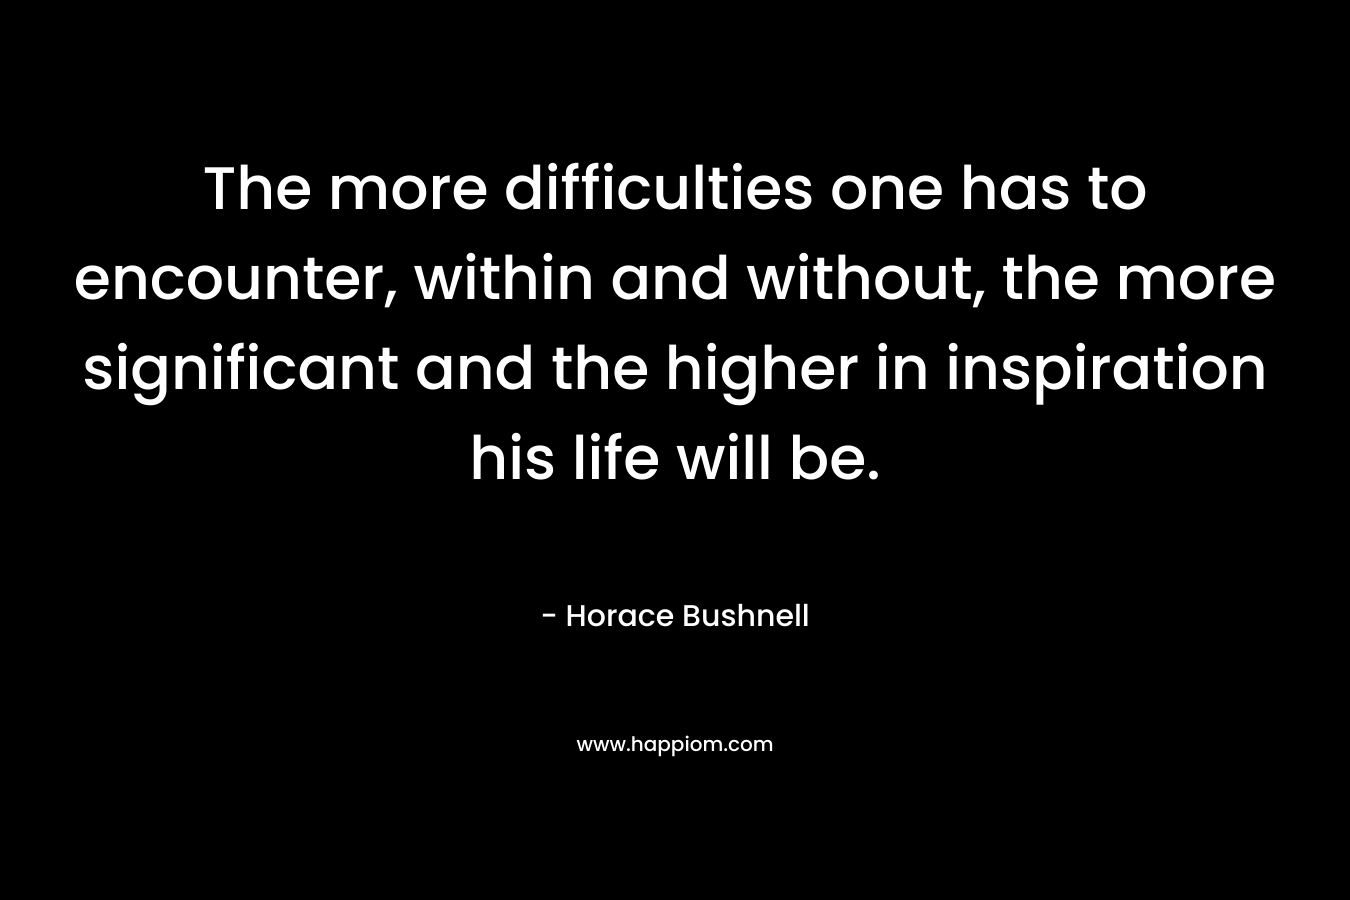 The more difficulties one has to encounter, within and without, the more significant and the higher in inspiration his life will be.